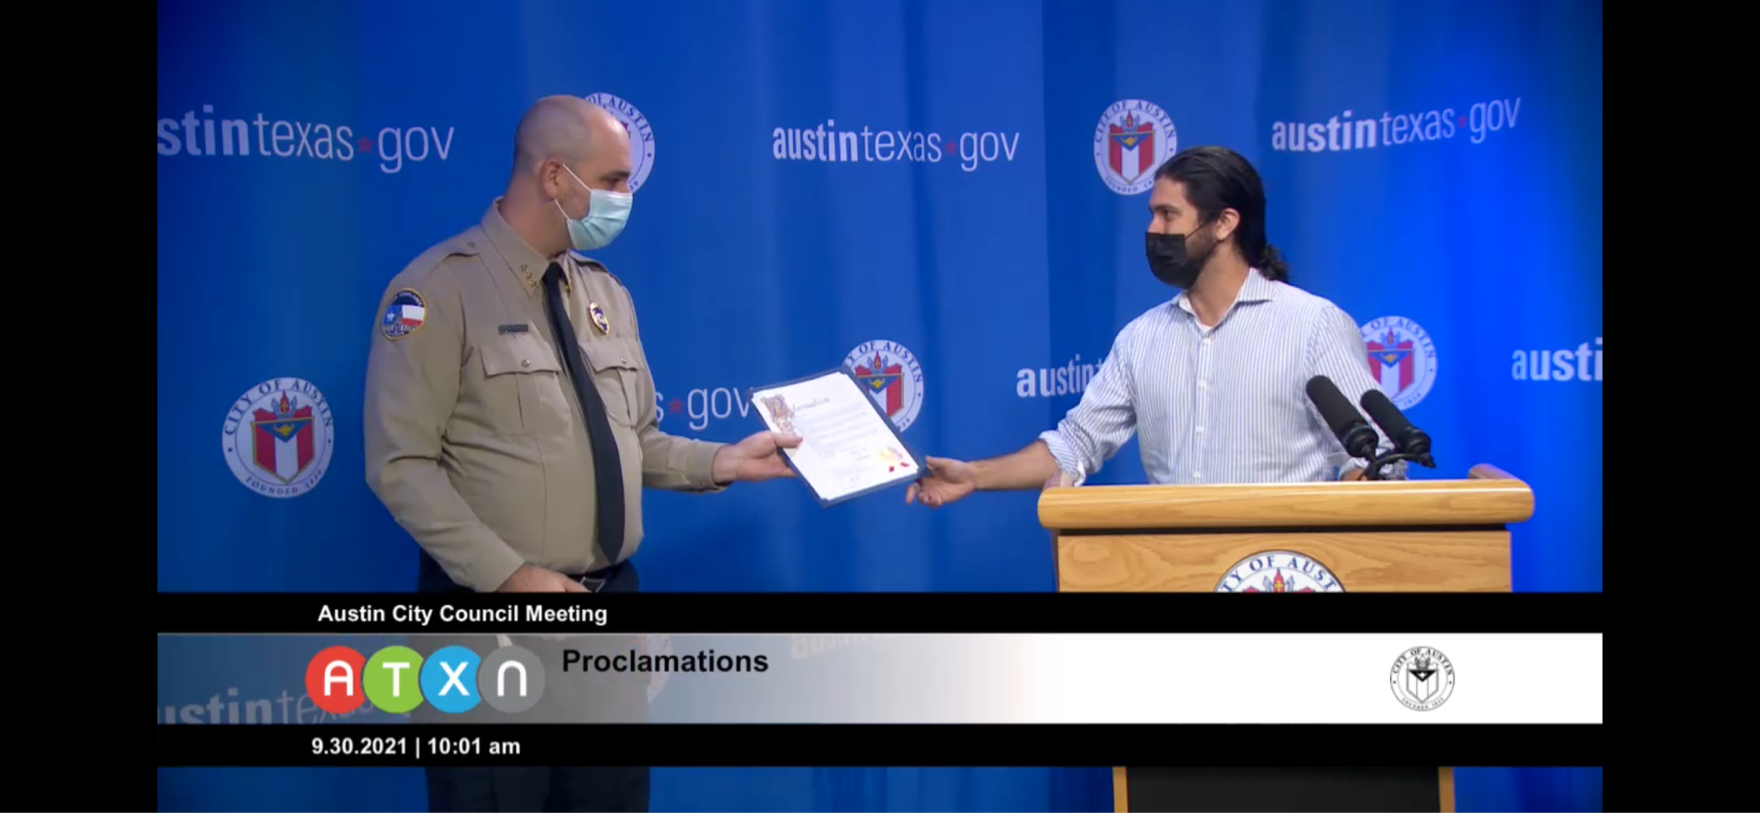 Screenshot from ATXN showing Assistant Director Daniel Word accepting the City's Proclamation of National Code Compliance Month beginning October 1.